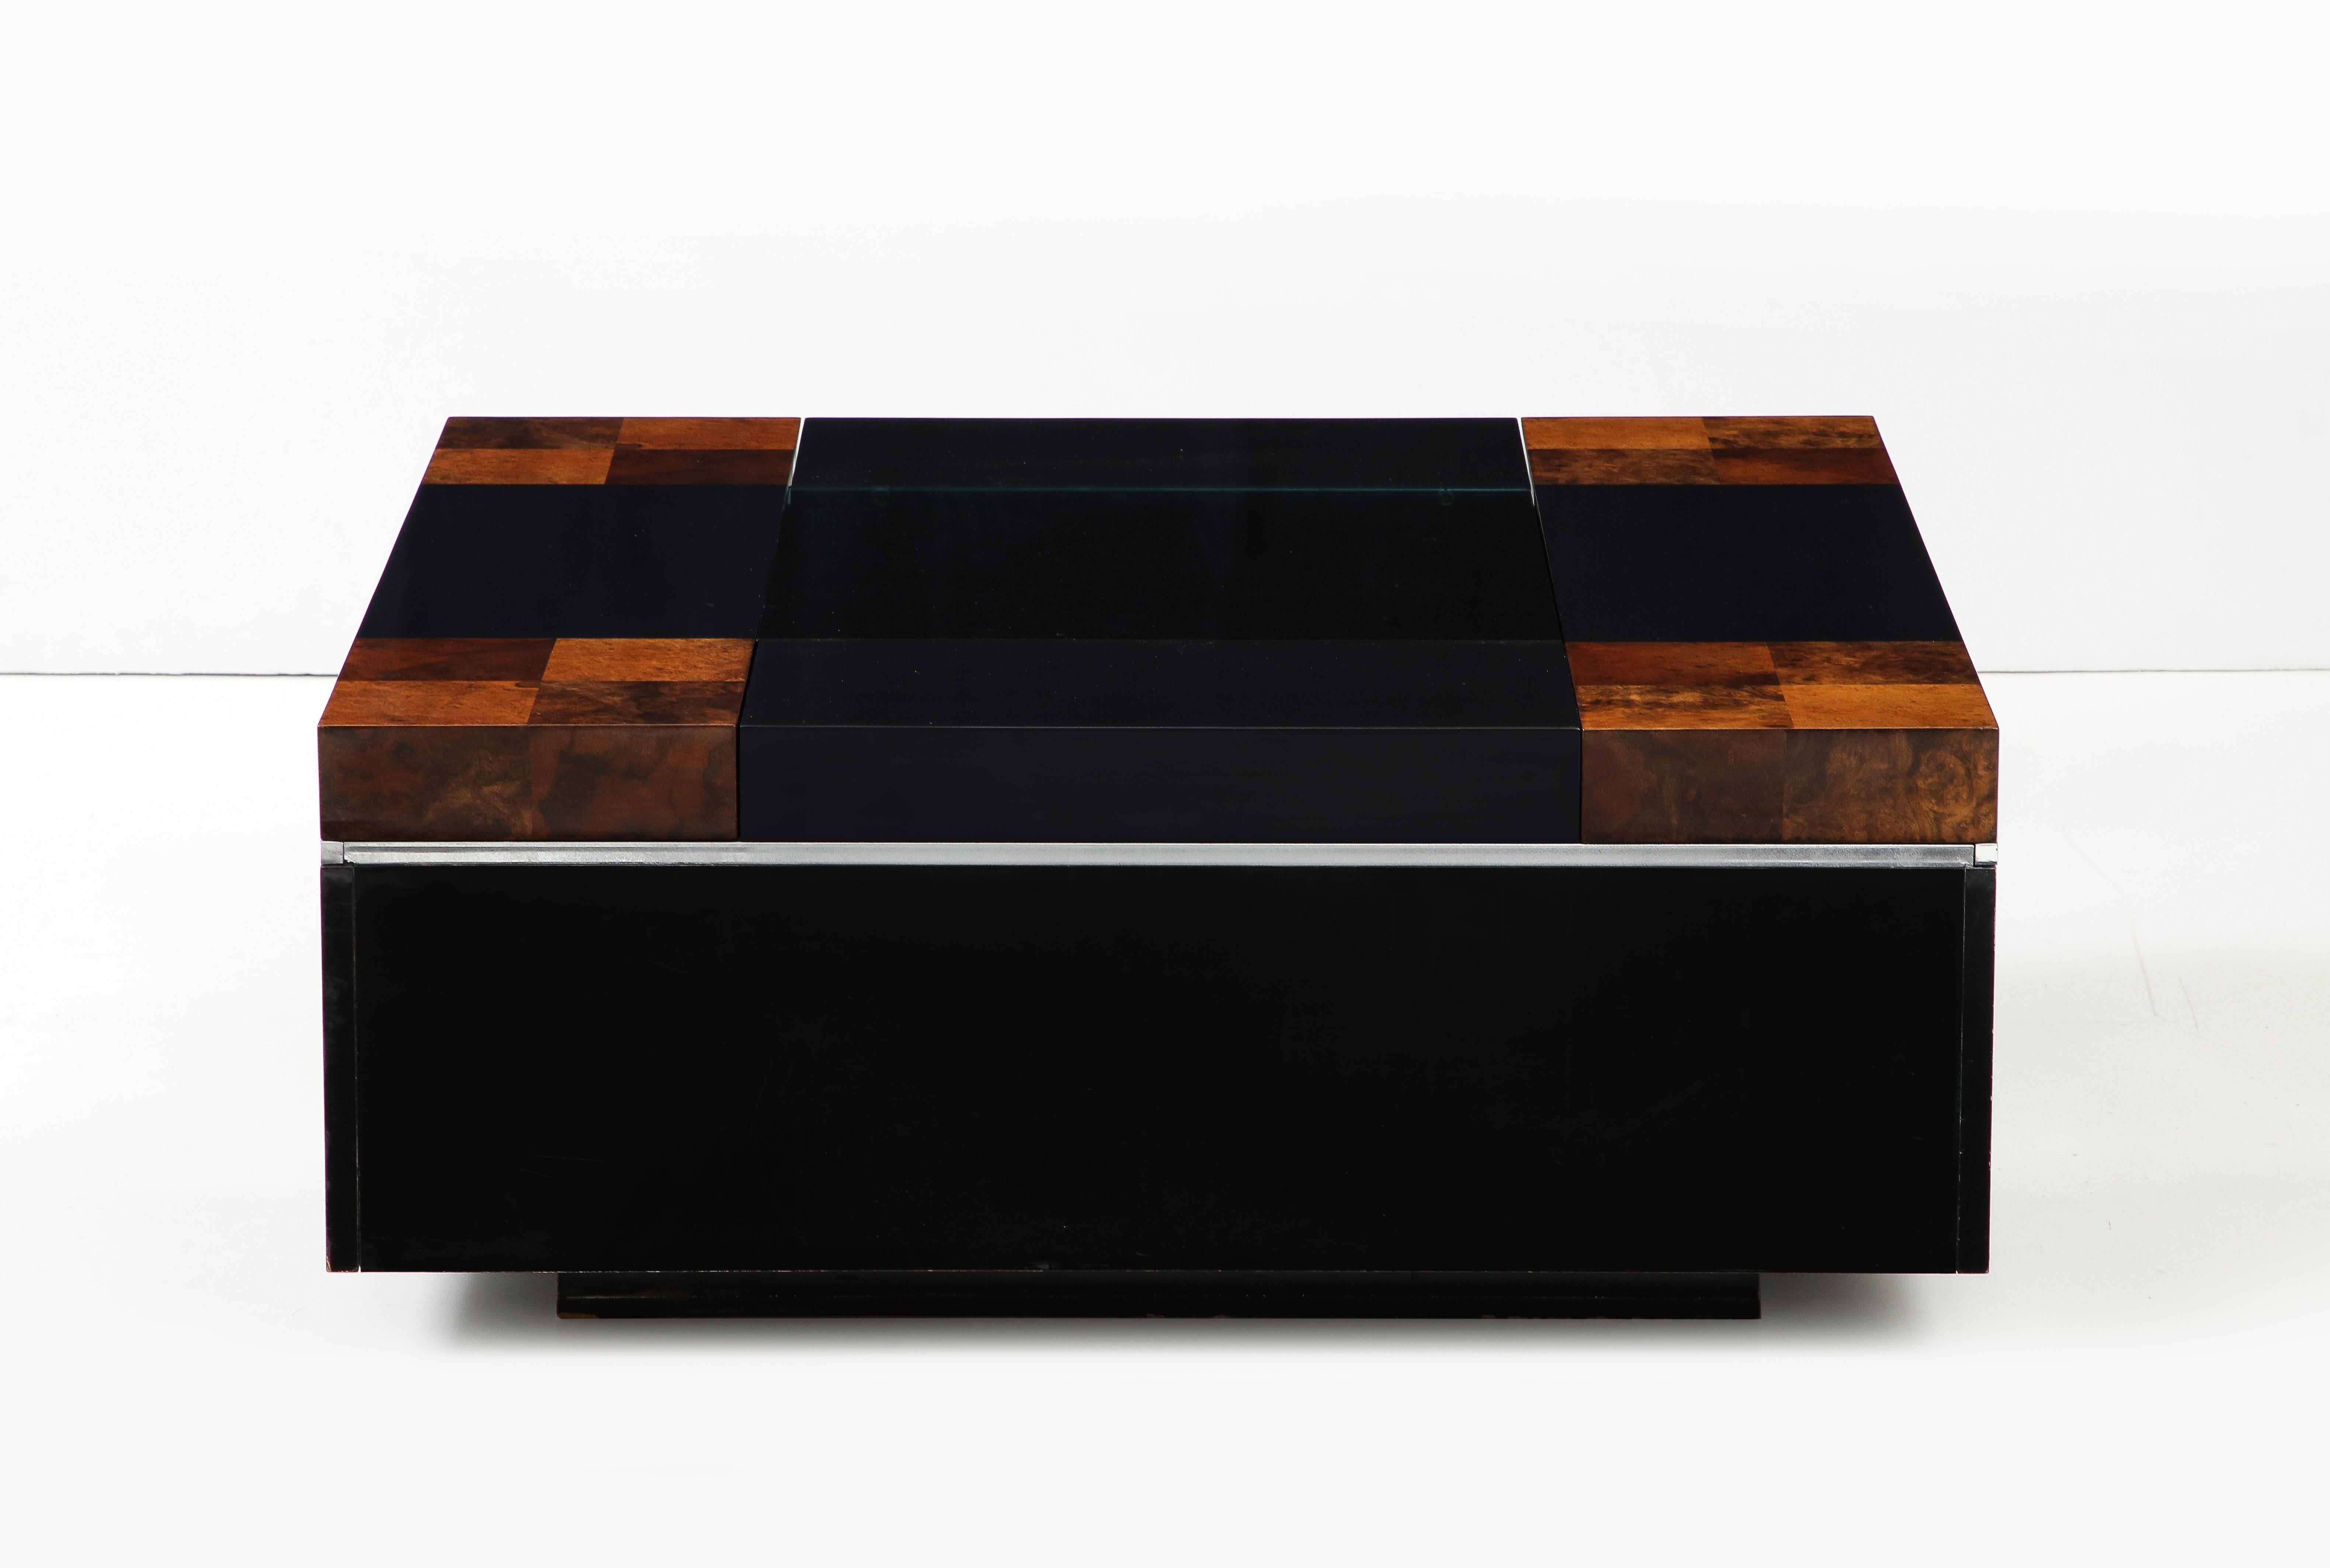 A Willy Rizzo floating square coffee table in burl wood and lacquer with chrome trim with smoked glass inset top.  The sides slide open to reveal storage, originally used for a bar.  The corners are stained for a checkerboard motif.  Very chic and